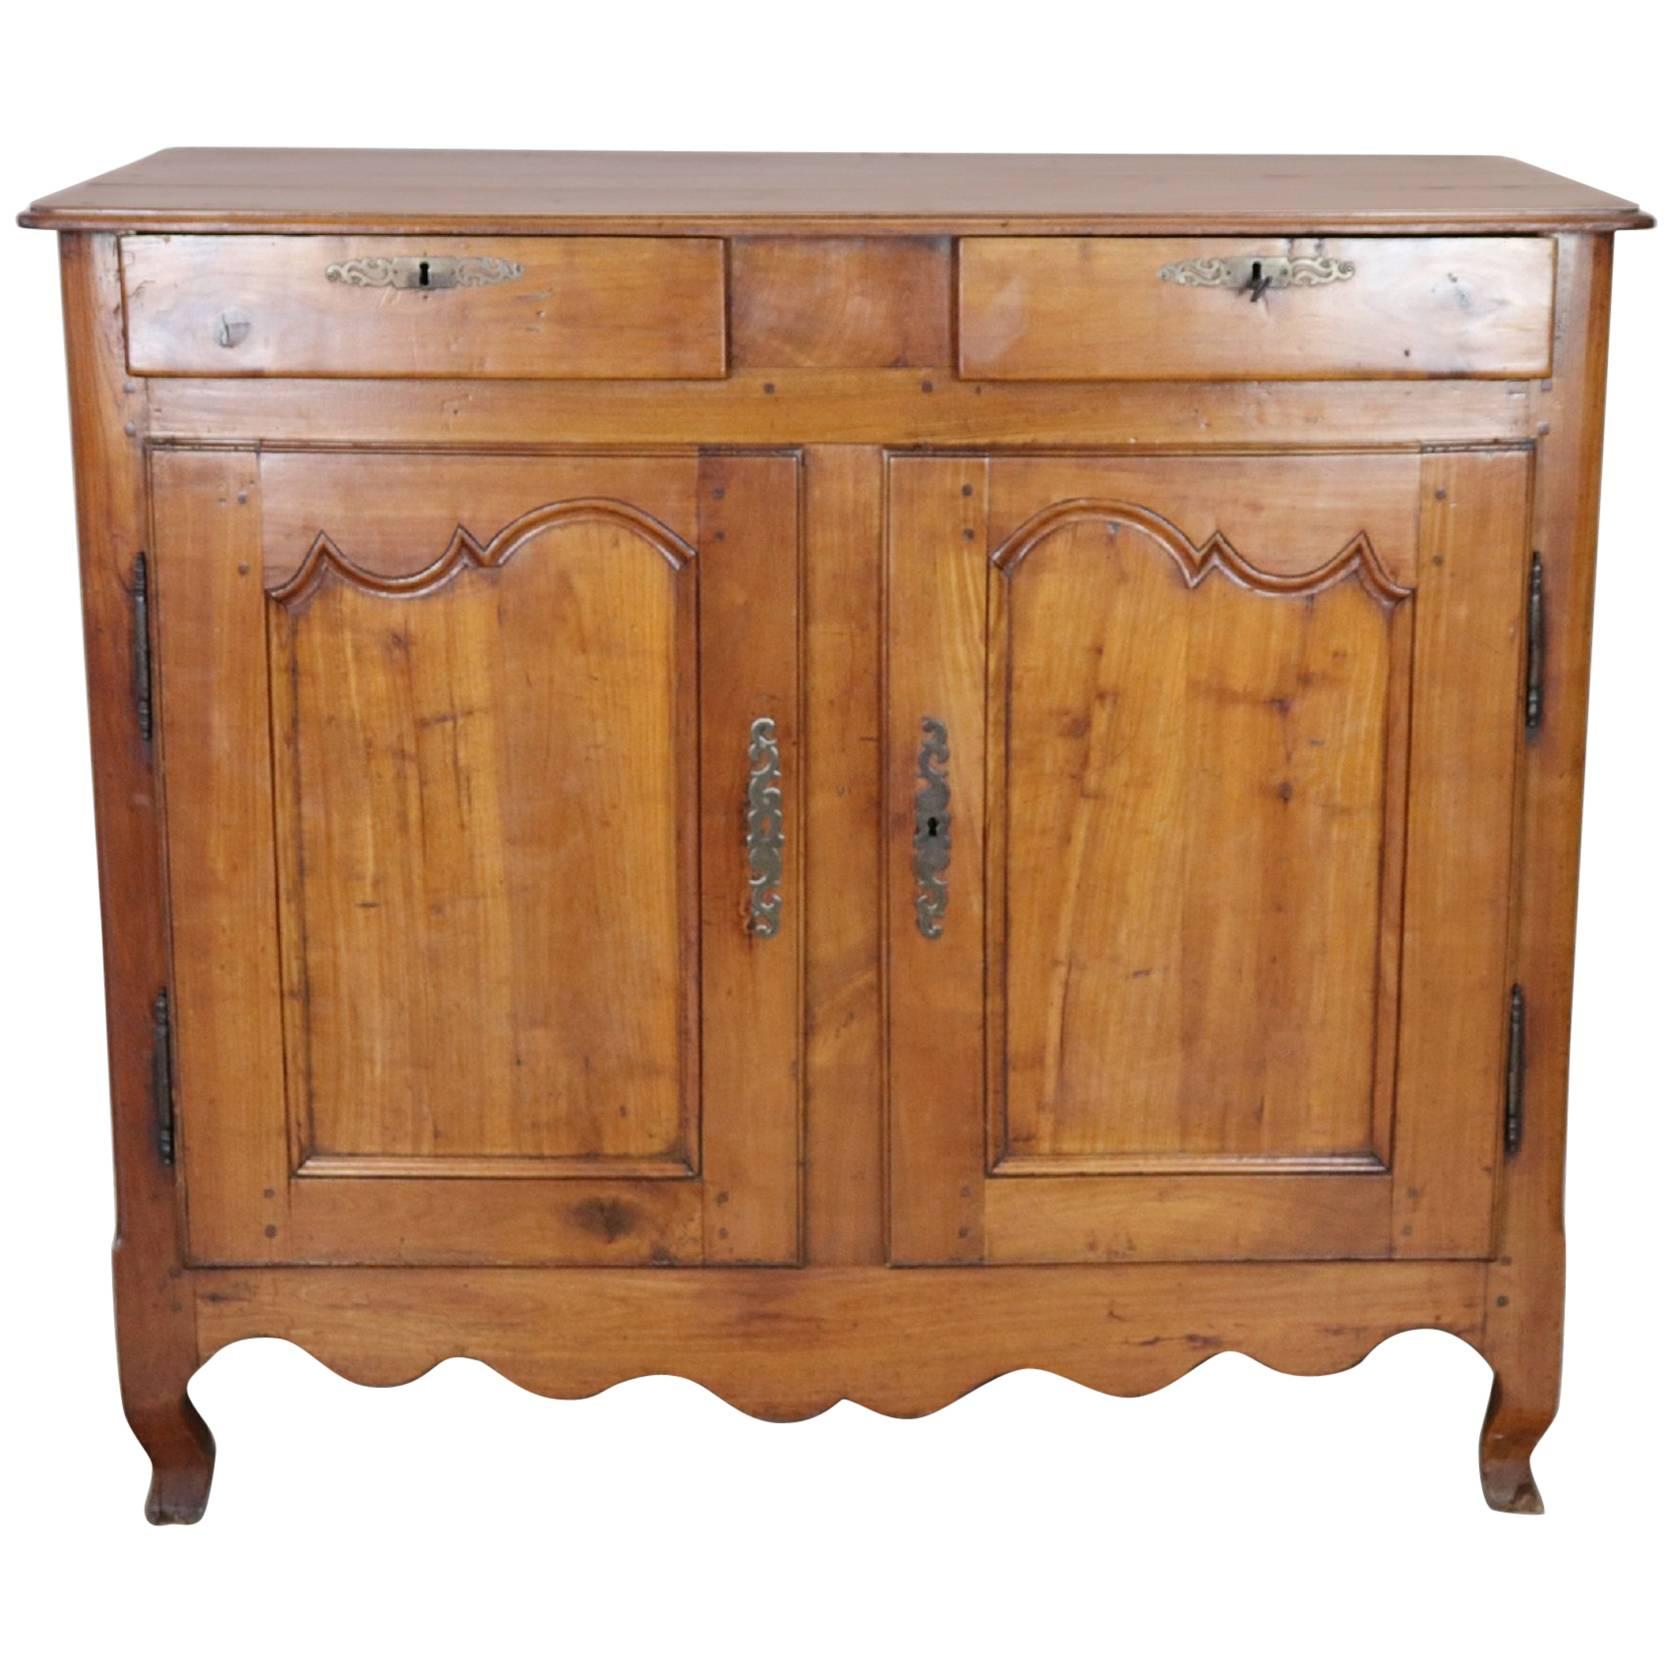 19th Century French Provencal Louis XV Style Cherry wood Sideboards